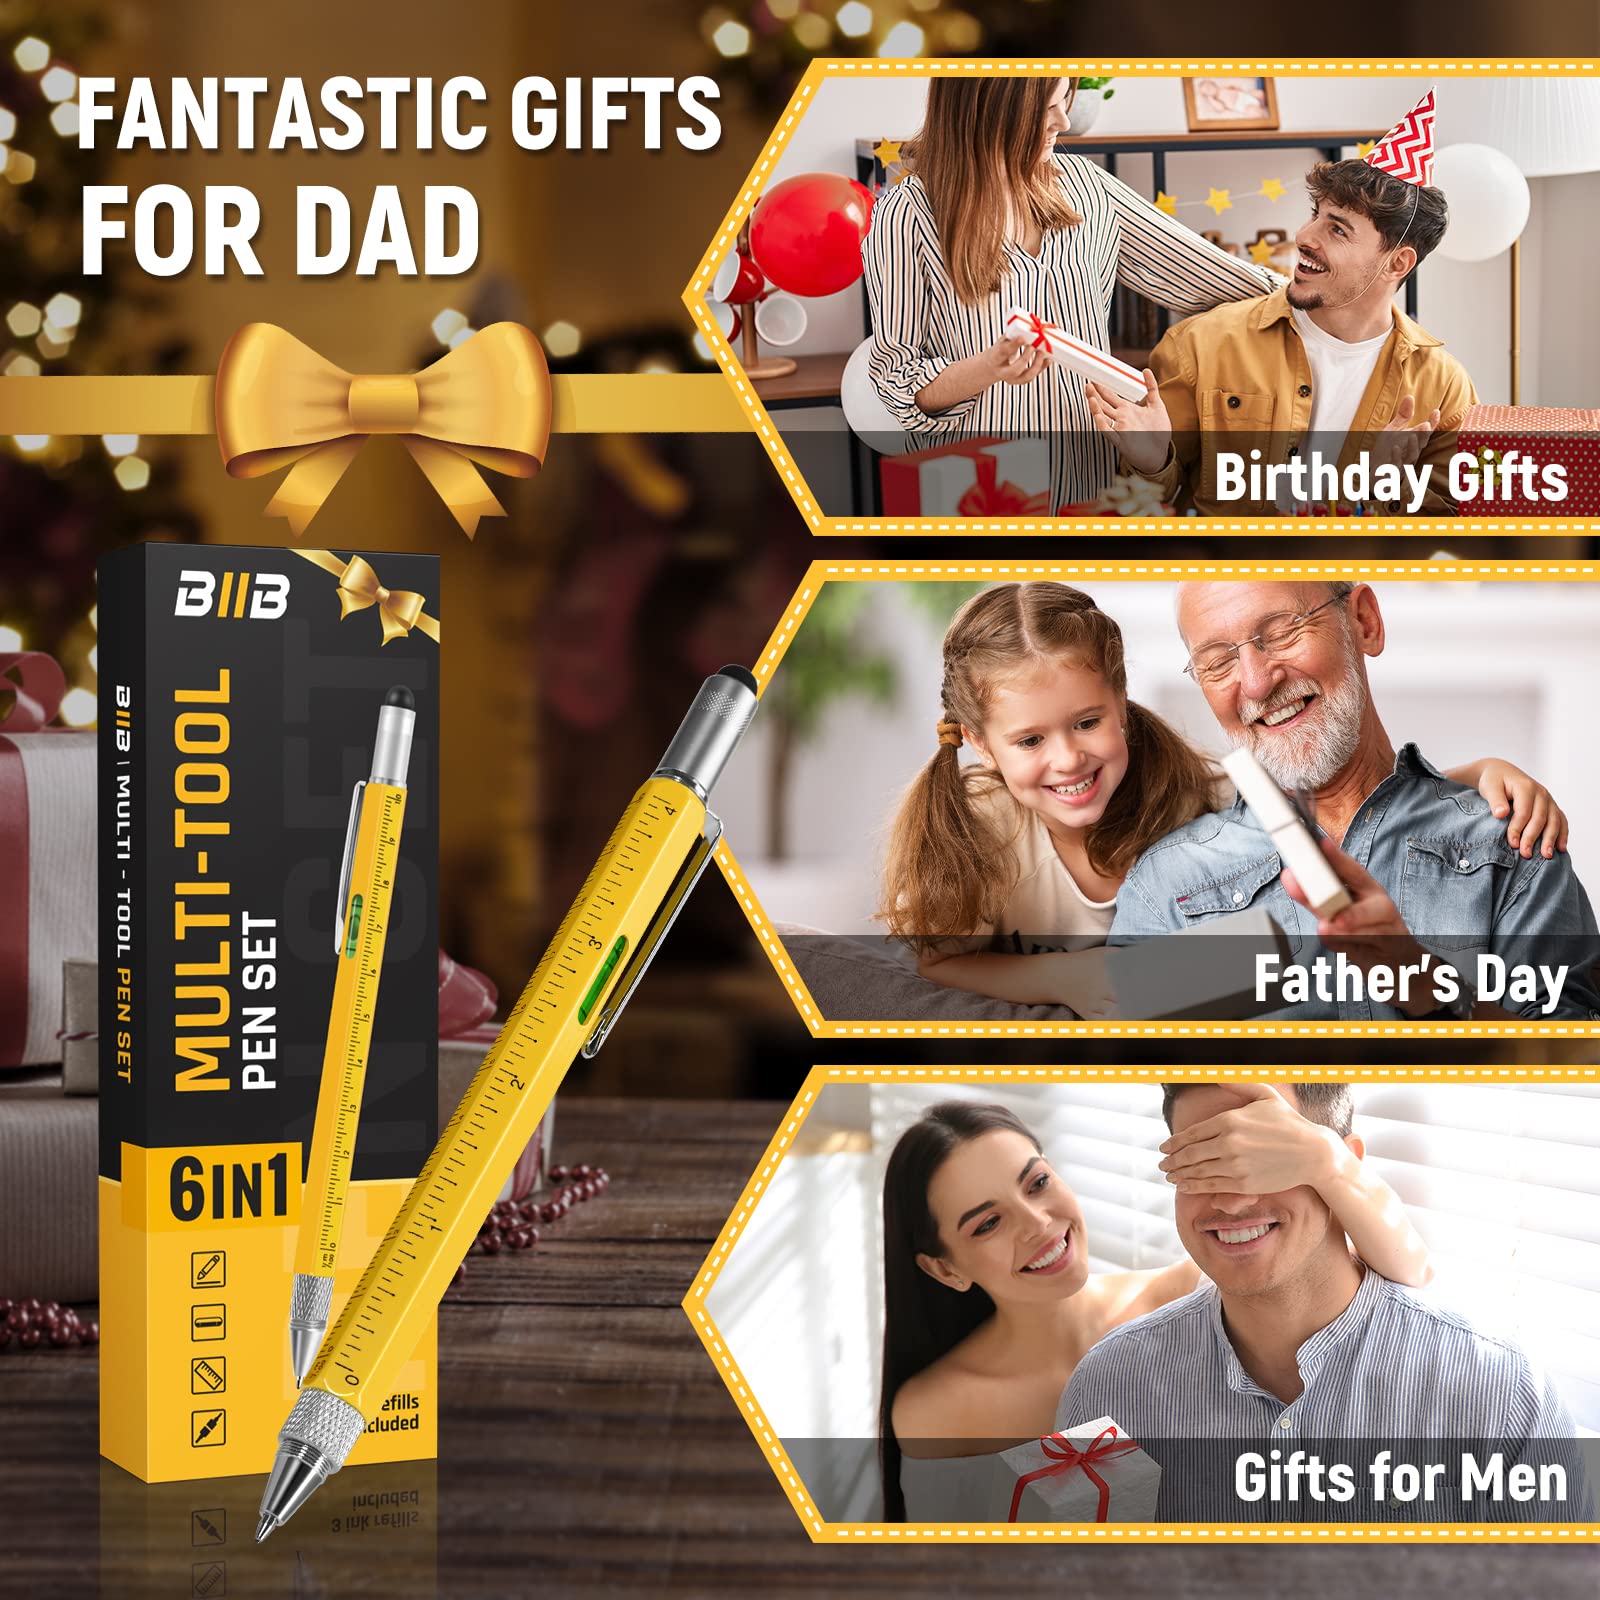 BIIB Gifts for Men, Multitool Pen Dad Gifts for Men, Birthday Gifts for Men, Mens Gifts for Boyfriend, Husband, Grandpa, Him, Cool Stuff Tools Gadgets for Men, Gifts for Dad Who Wants Nothing